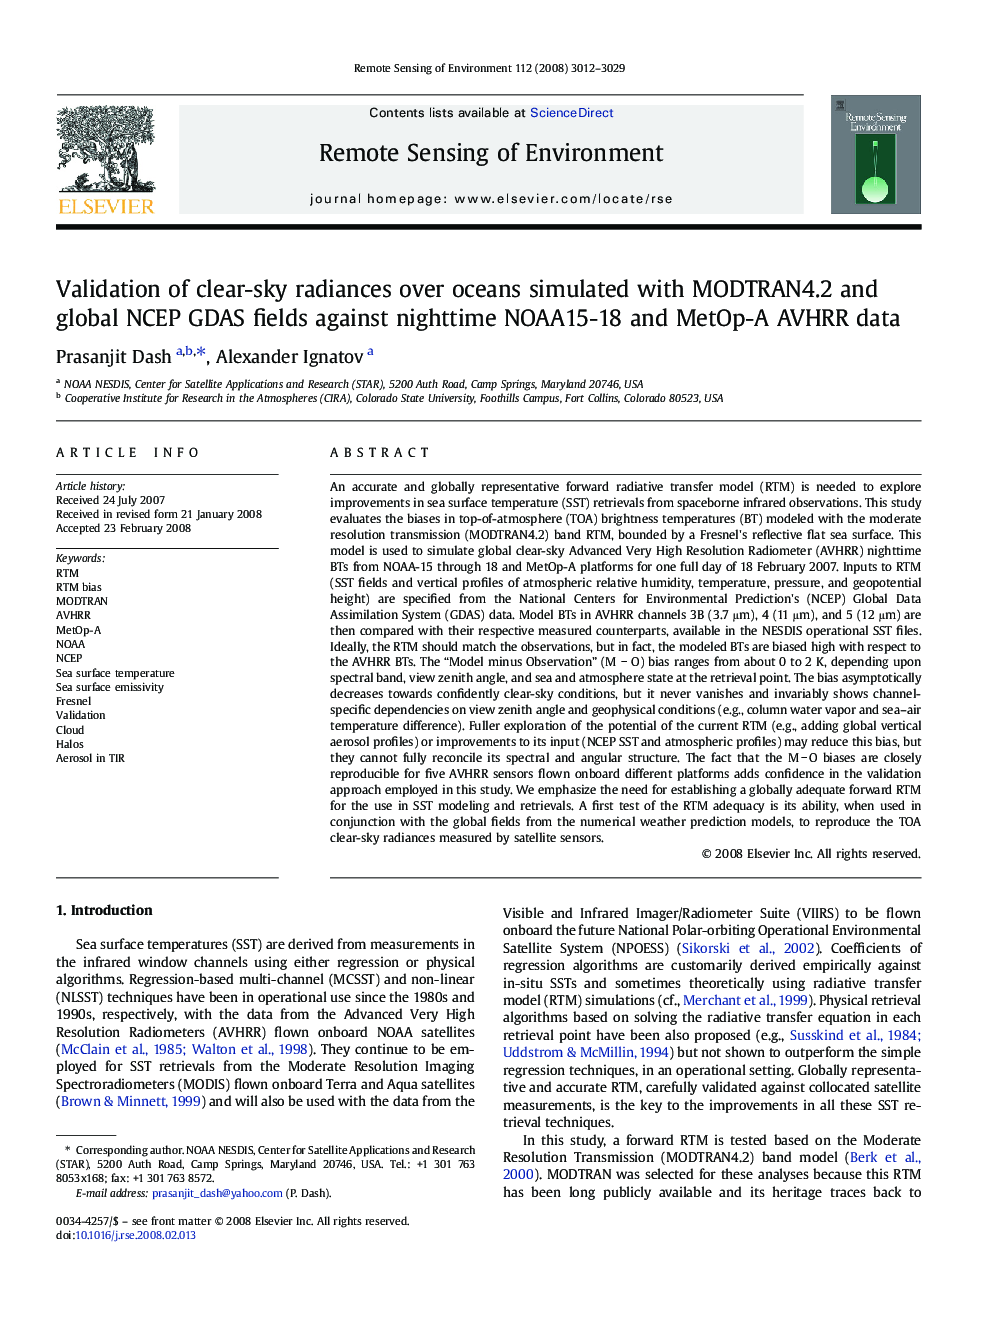 Validation of clear-sky radiances over oceans simulated with MODTRAN4.2 and global NCEP GDAS fields against nighttime NOAA15-18 and MetOp-A AVHRR data